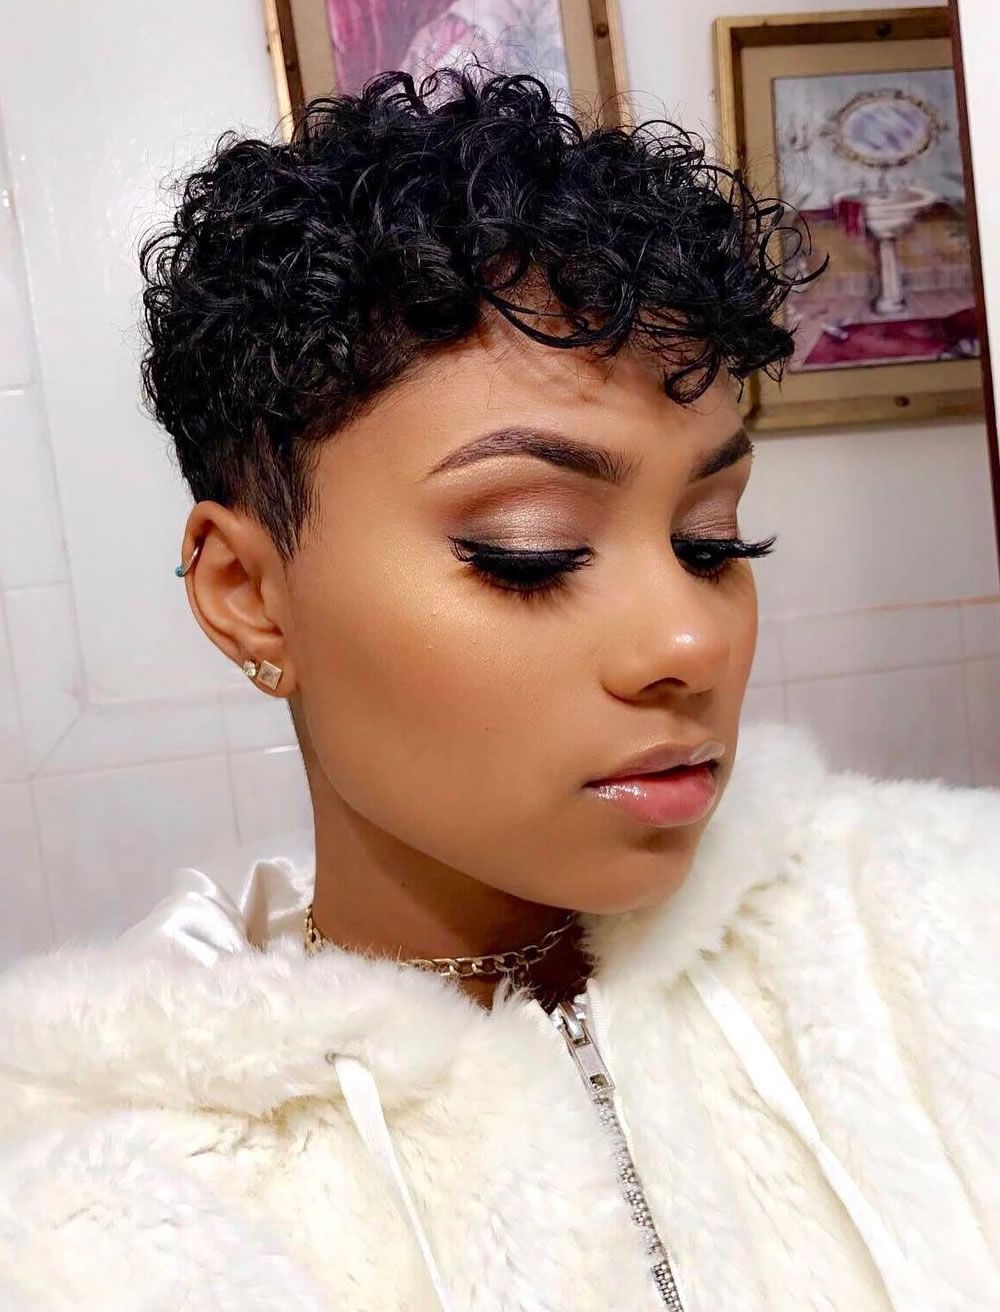 Curly Natural Short Hair Hairstyles For Black Women – Hairstyles With Regard To Curly Short Hairstyles Black Women (View 7 of 25)